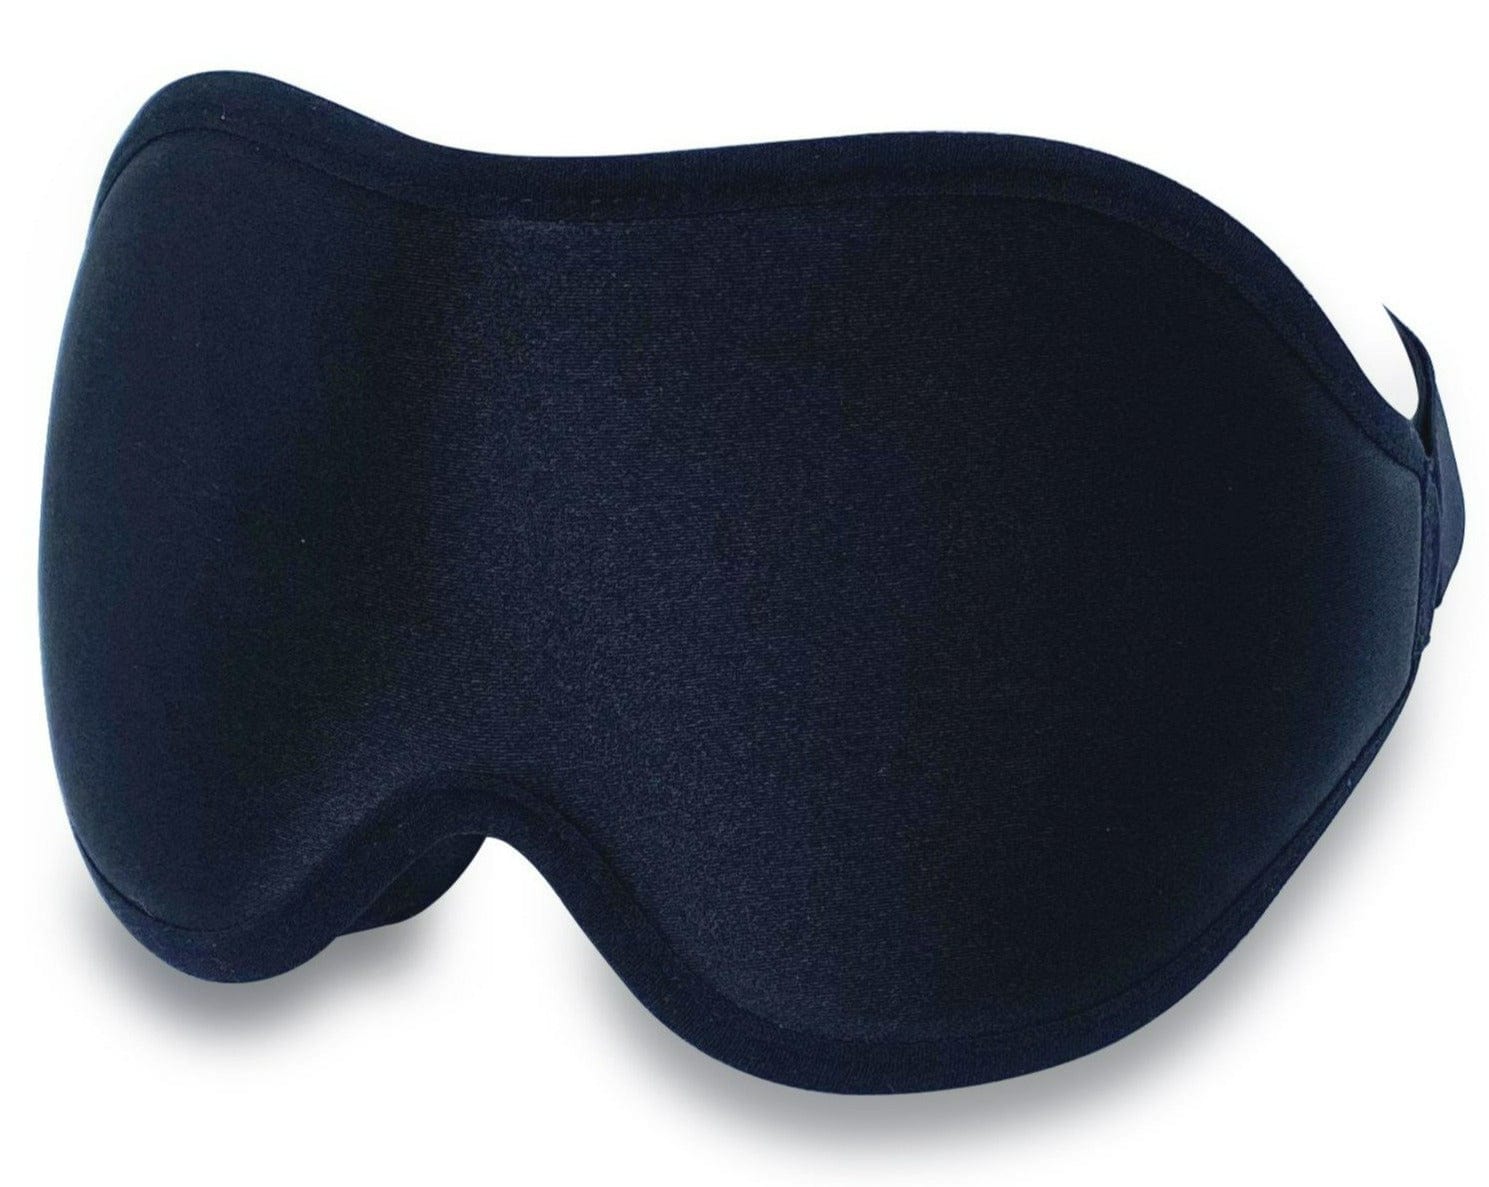 Why You Should Be Using a Sleep Mask